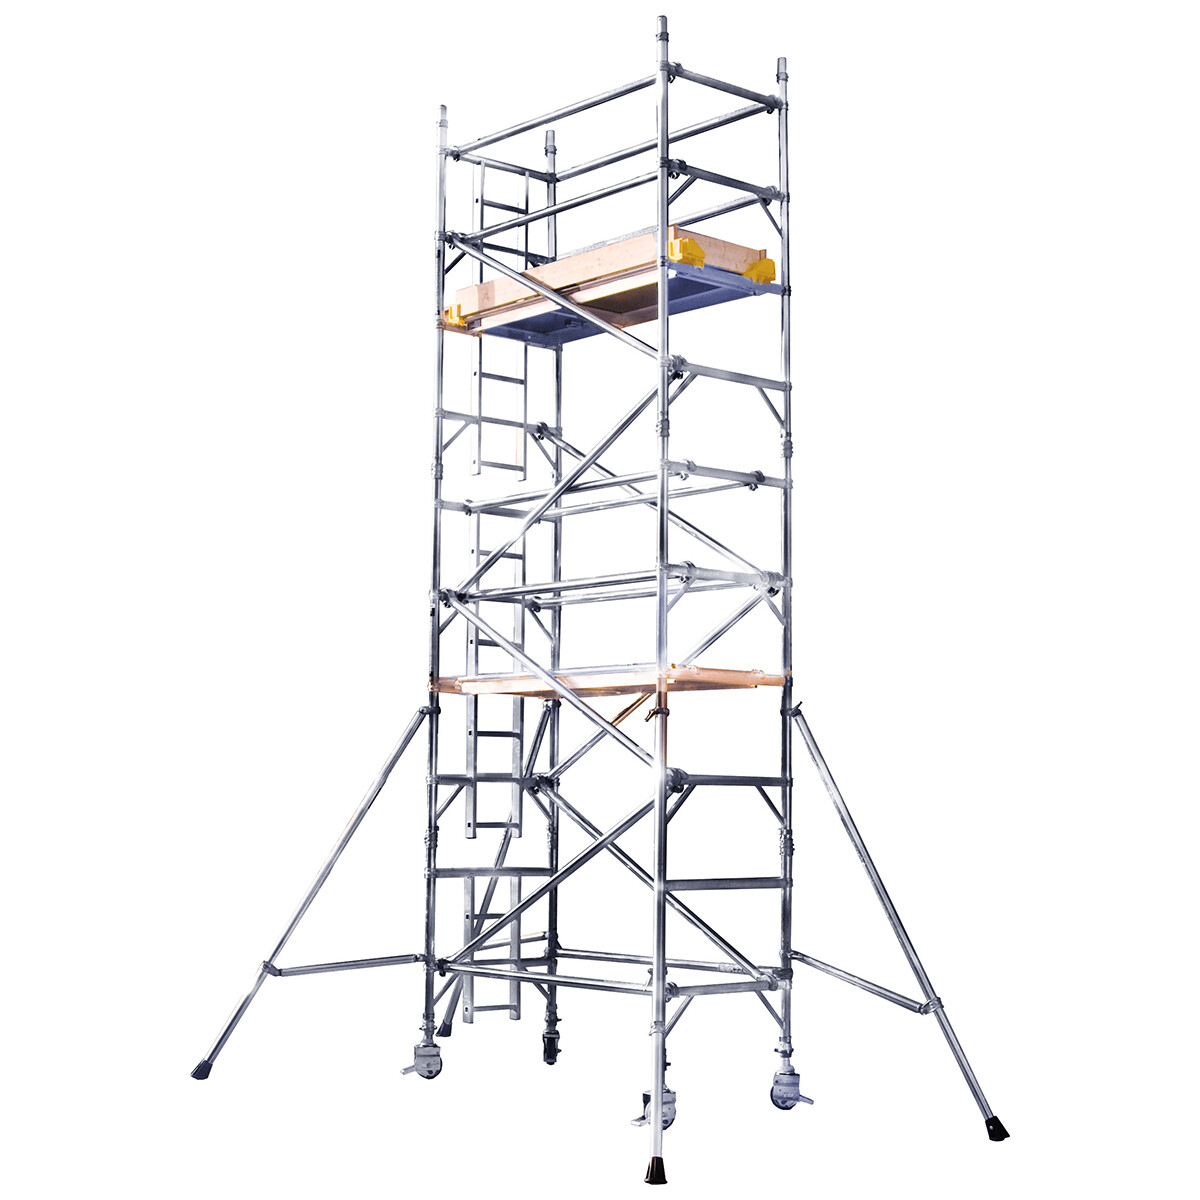 Narrow Span Mobile Tower - 0.85m wide x 5.3m high